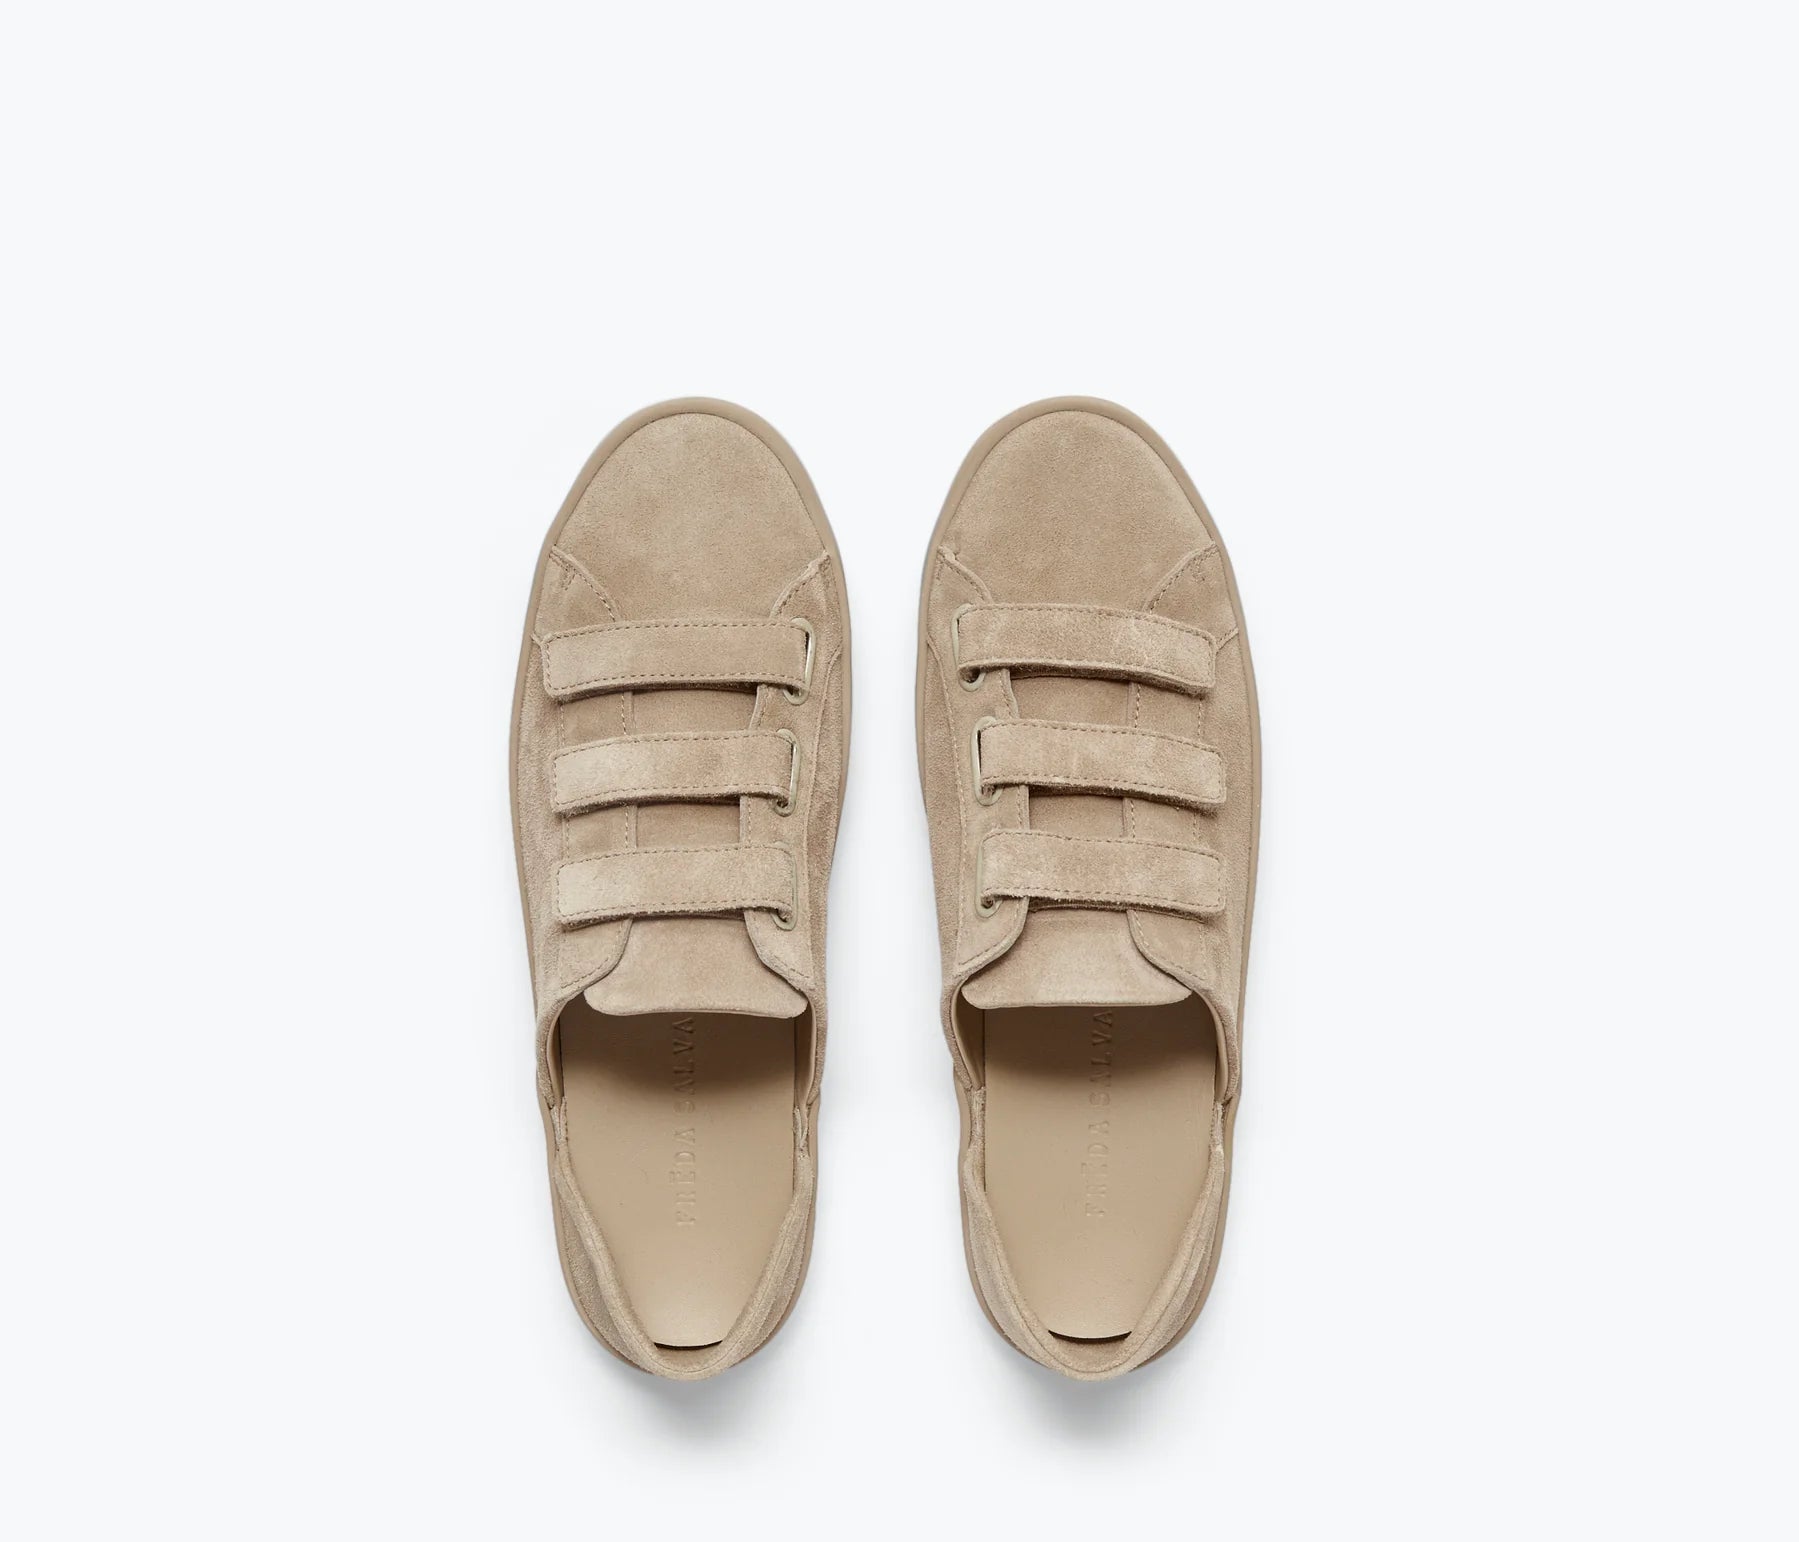 LIBBY D'ORSAY SNEAKER - STUCCO SUEDE